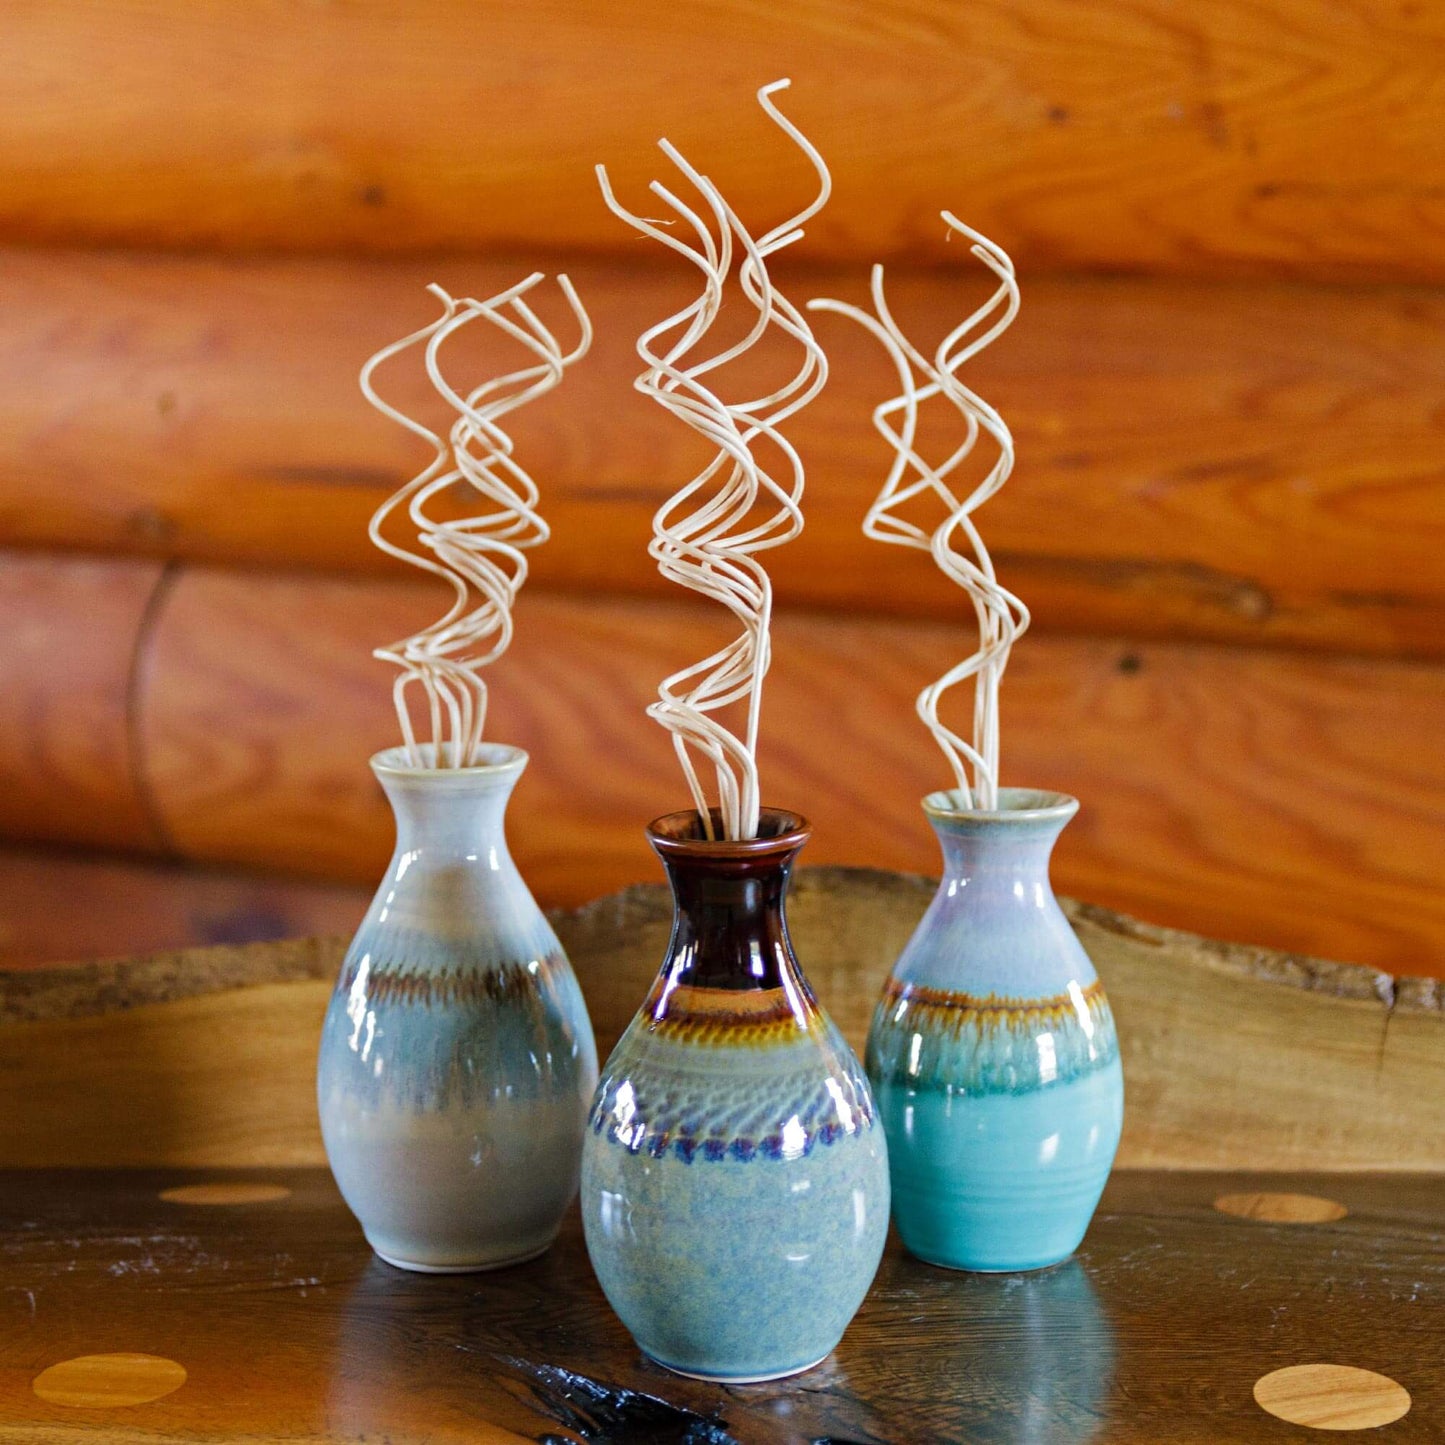 Handmade Pottery Diffuser made by Georgetown Pottery in Maine